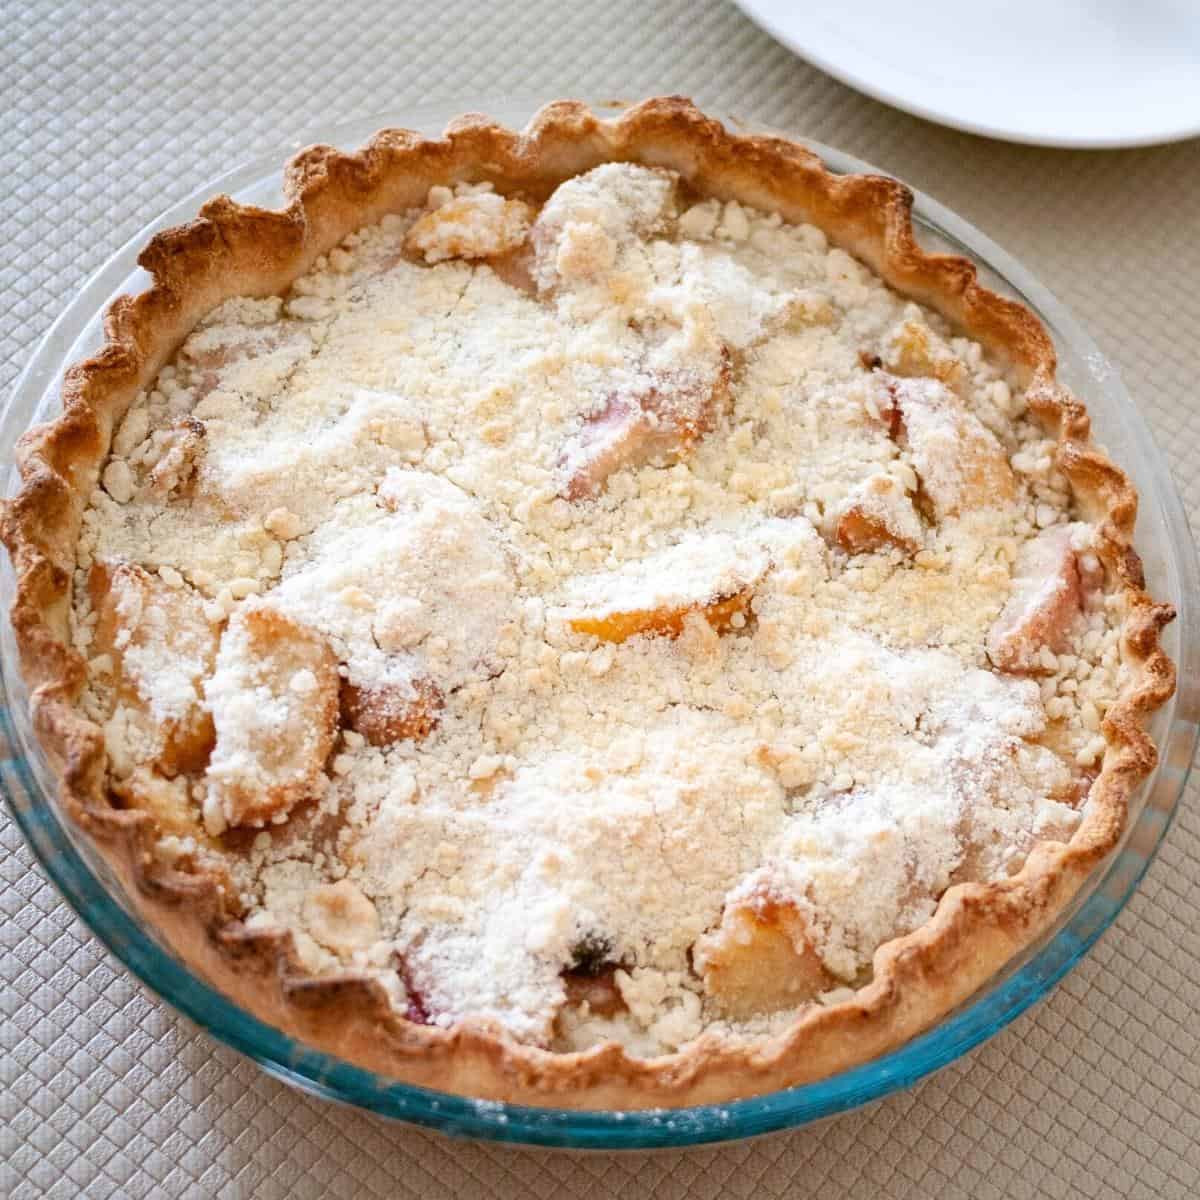 A pie with peaches on a table.